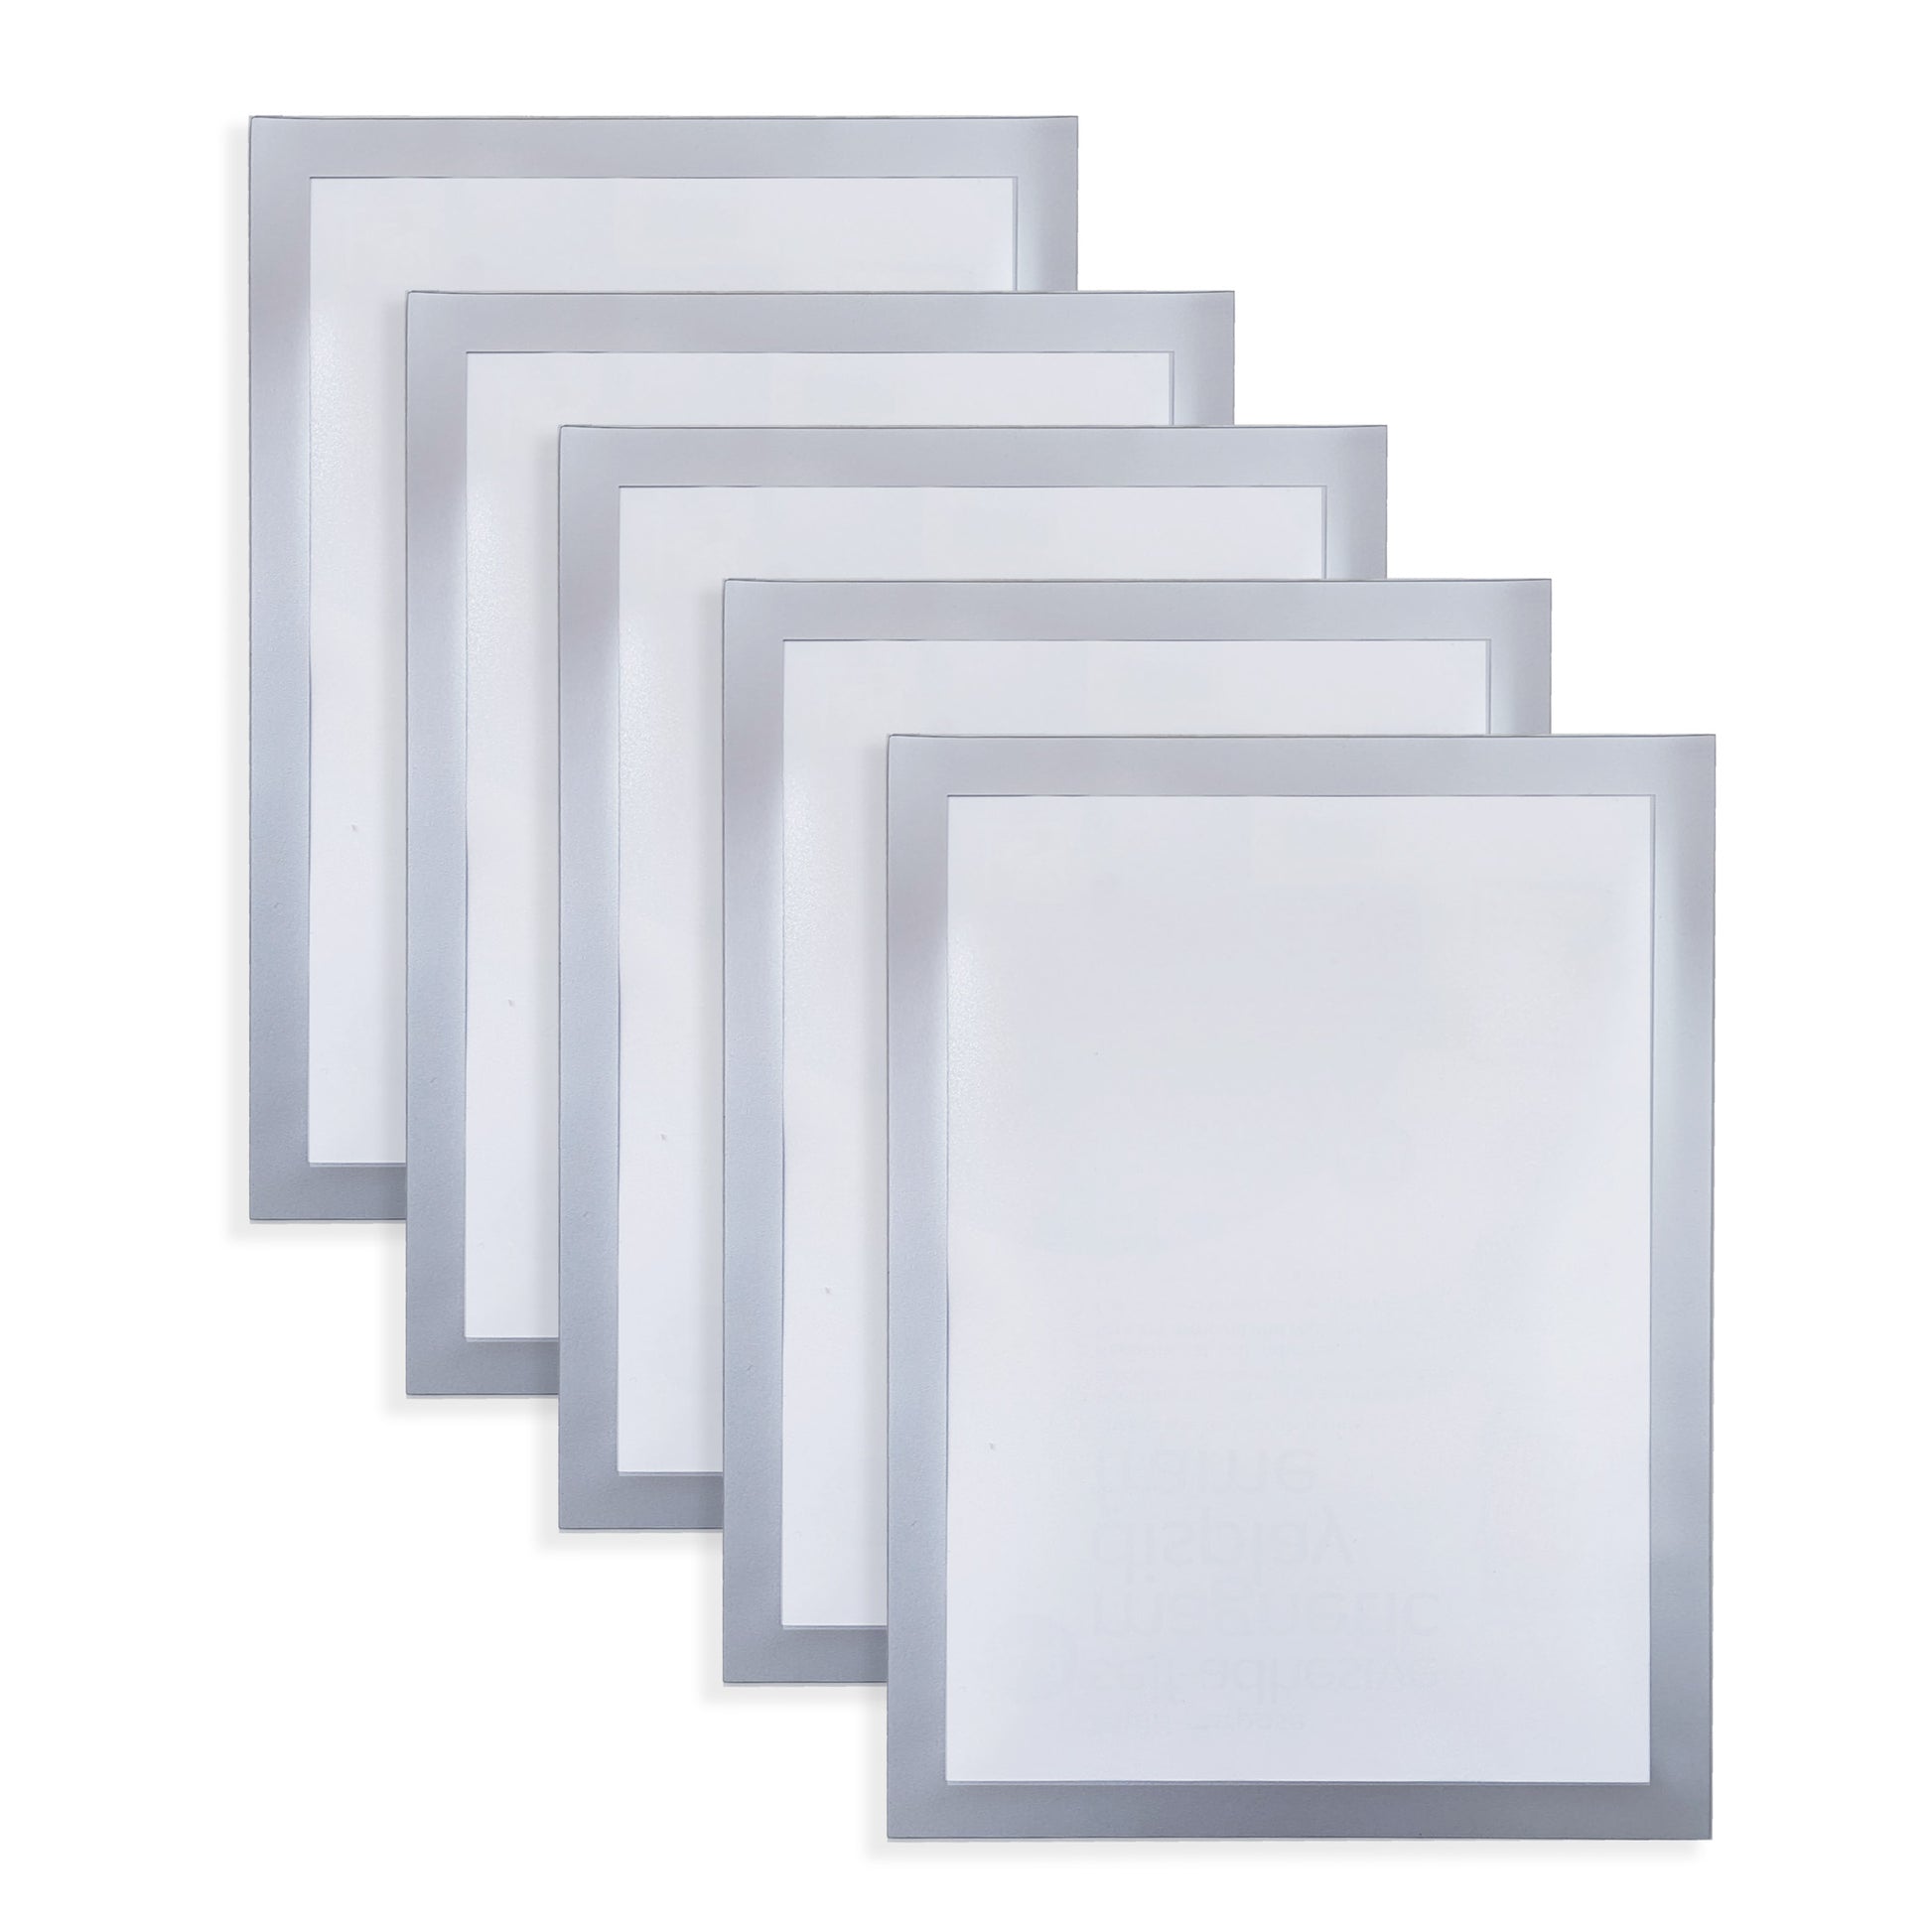 A stack of five A4 self-adhesive magnetic display frames with translucent center and silver borders, displayed in a fan arrangement to show the multiple units included in the package.